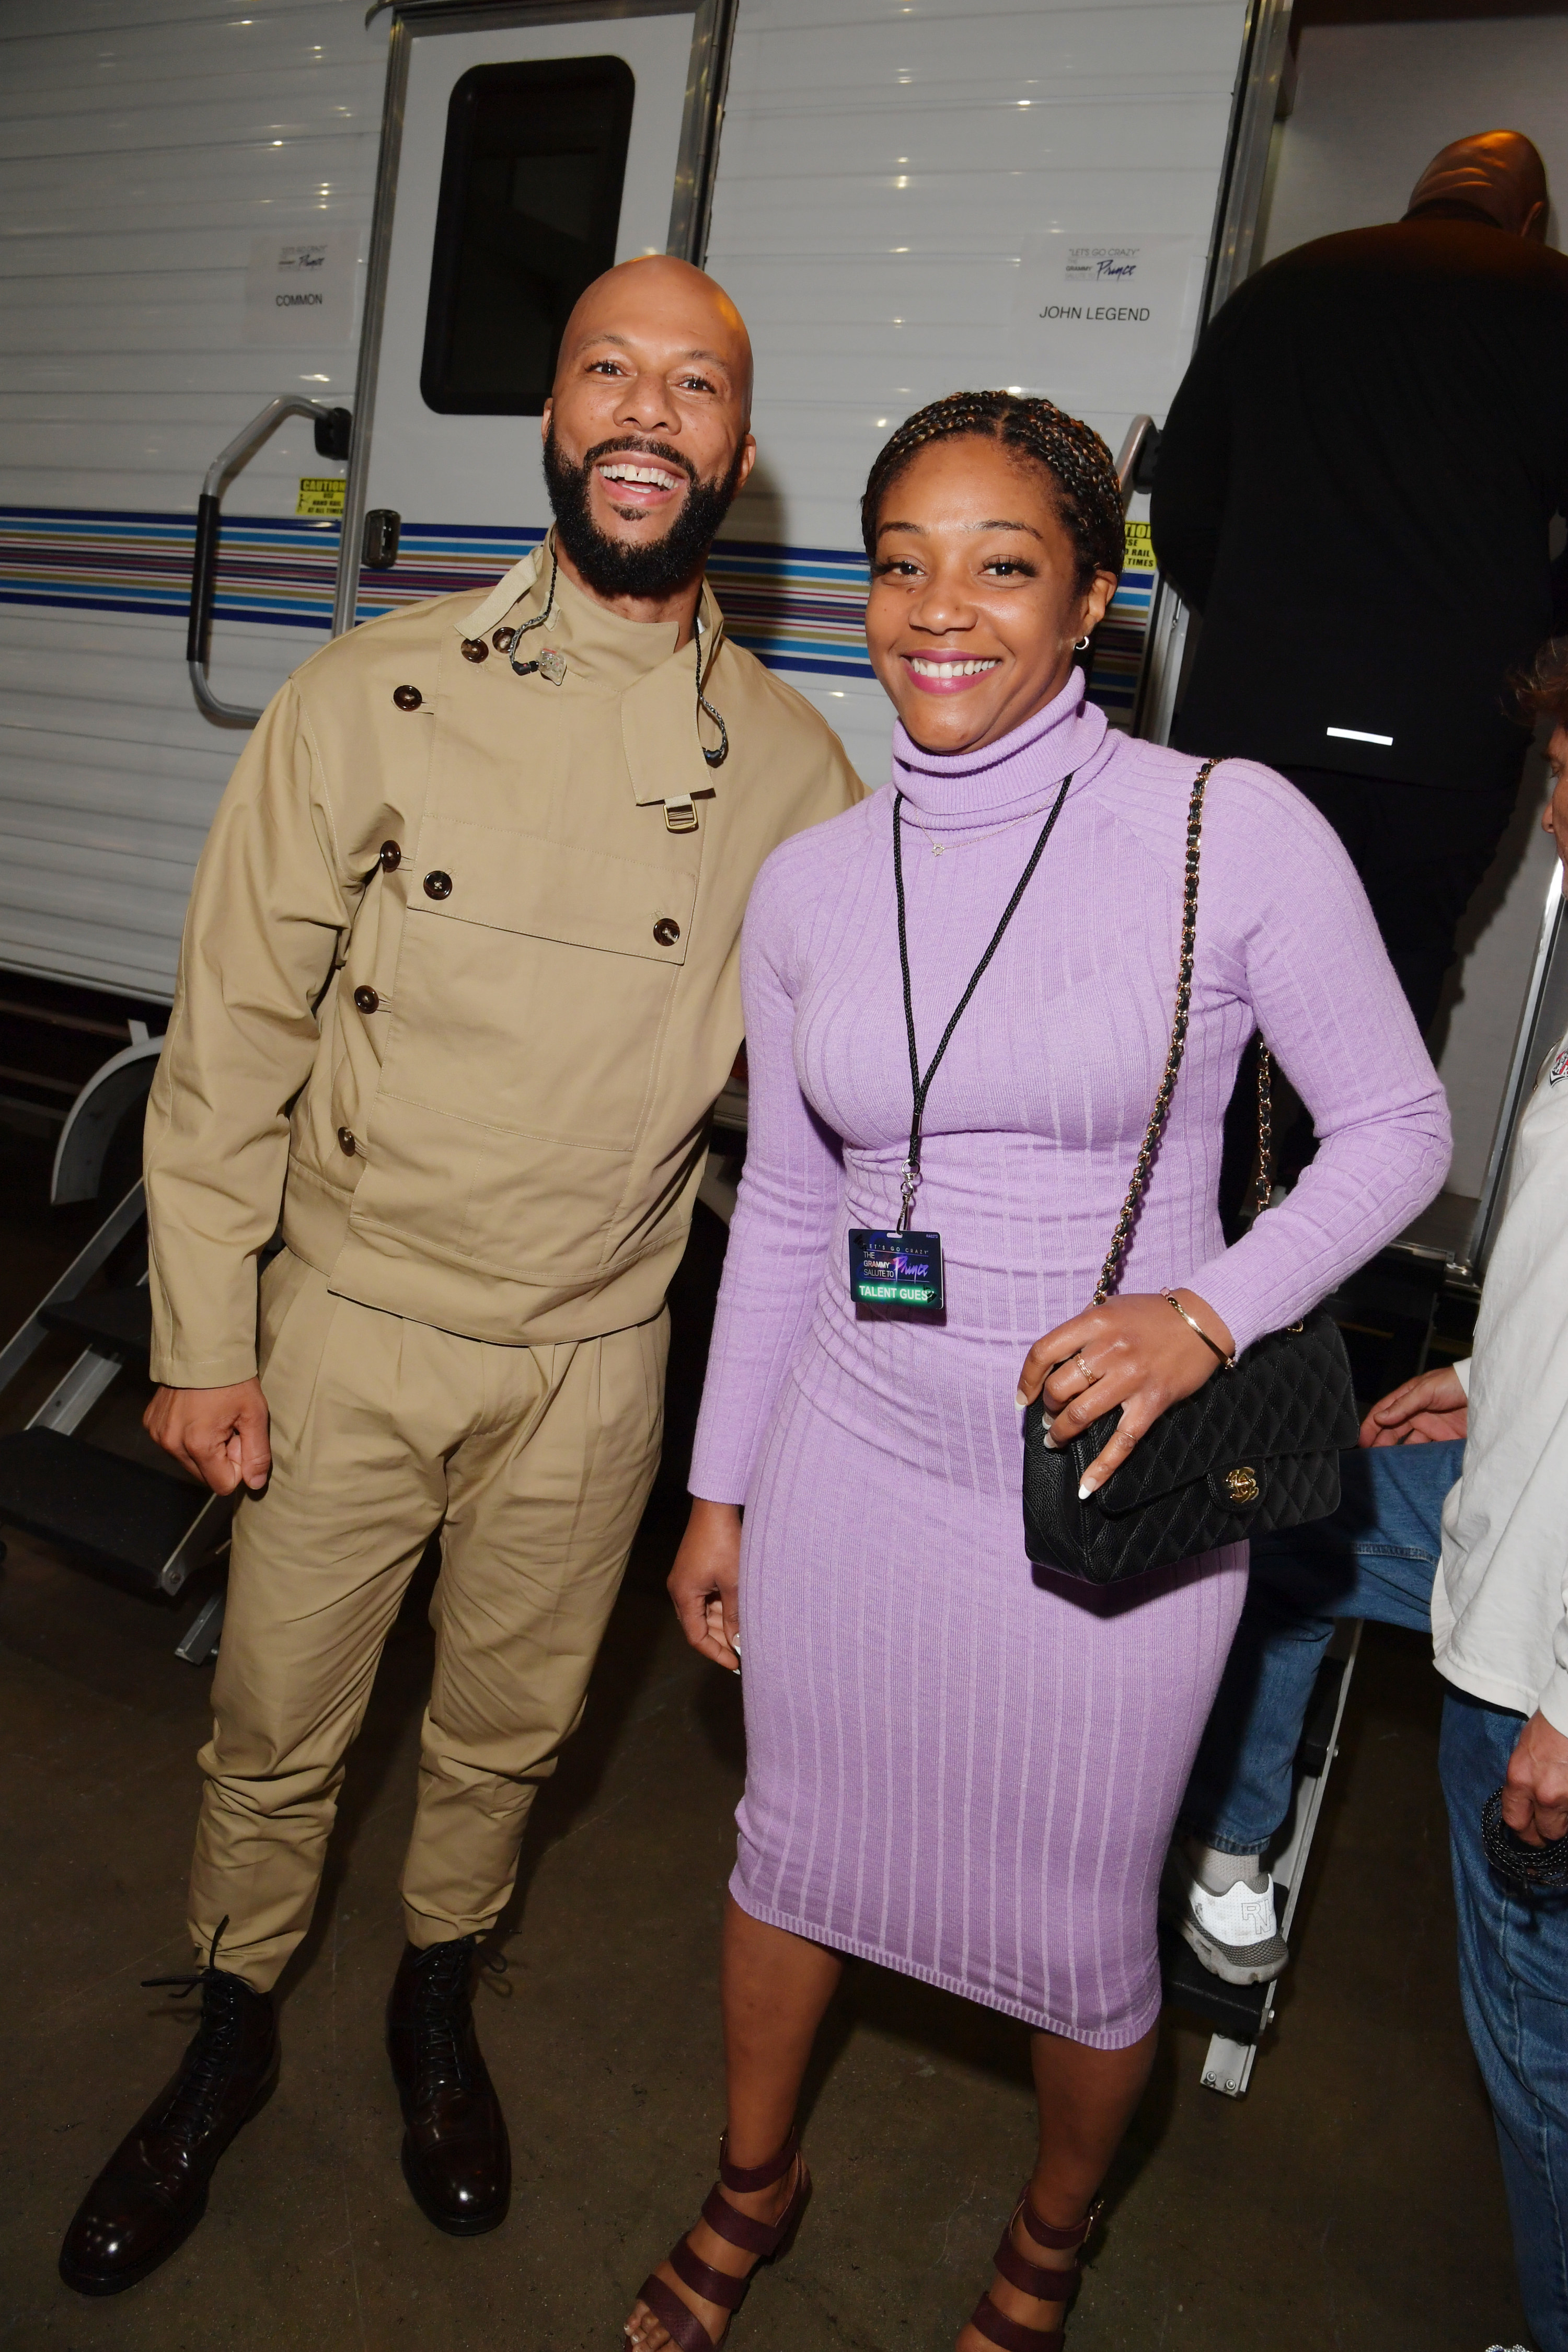 Haddish smiles while standing next to Common